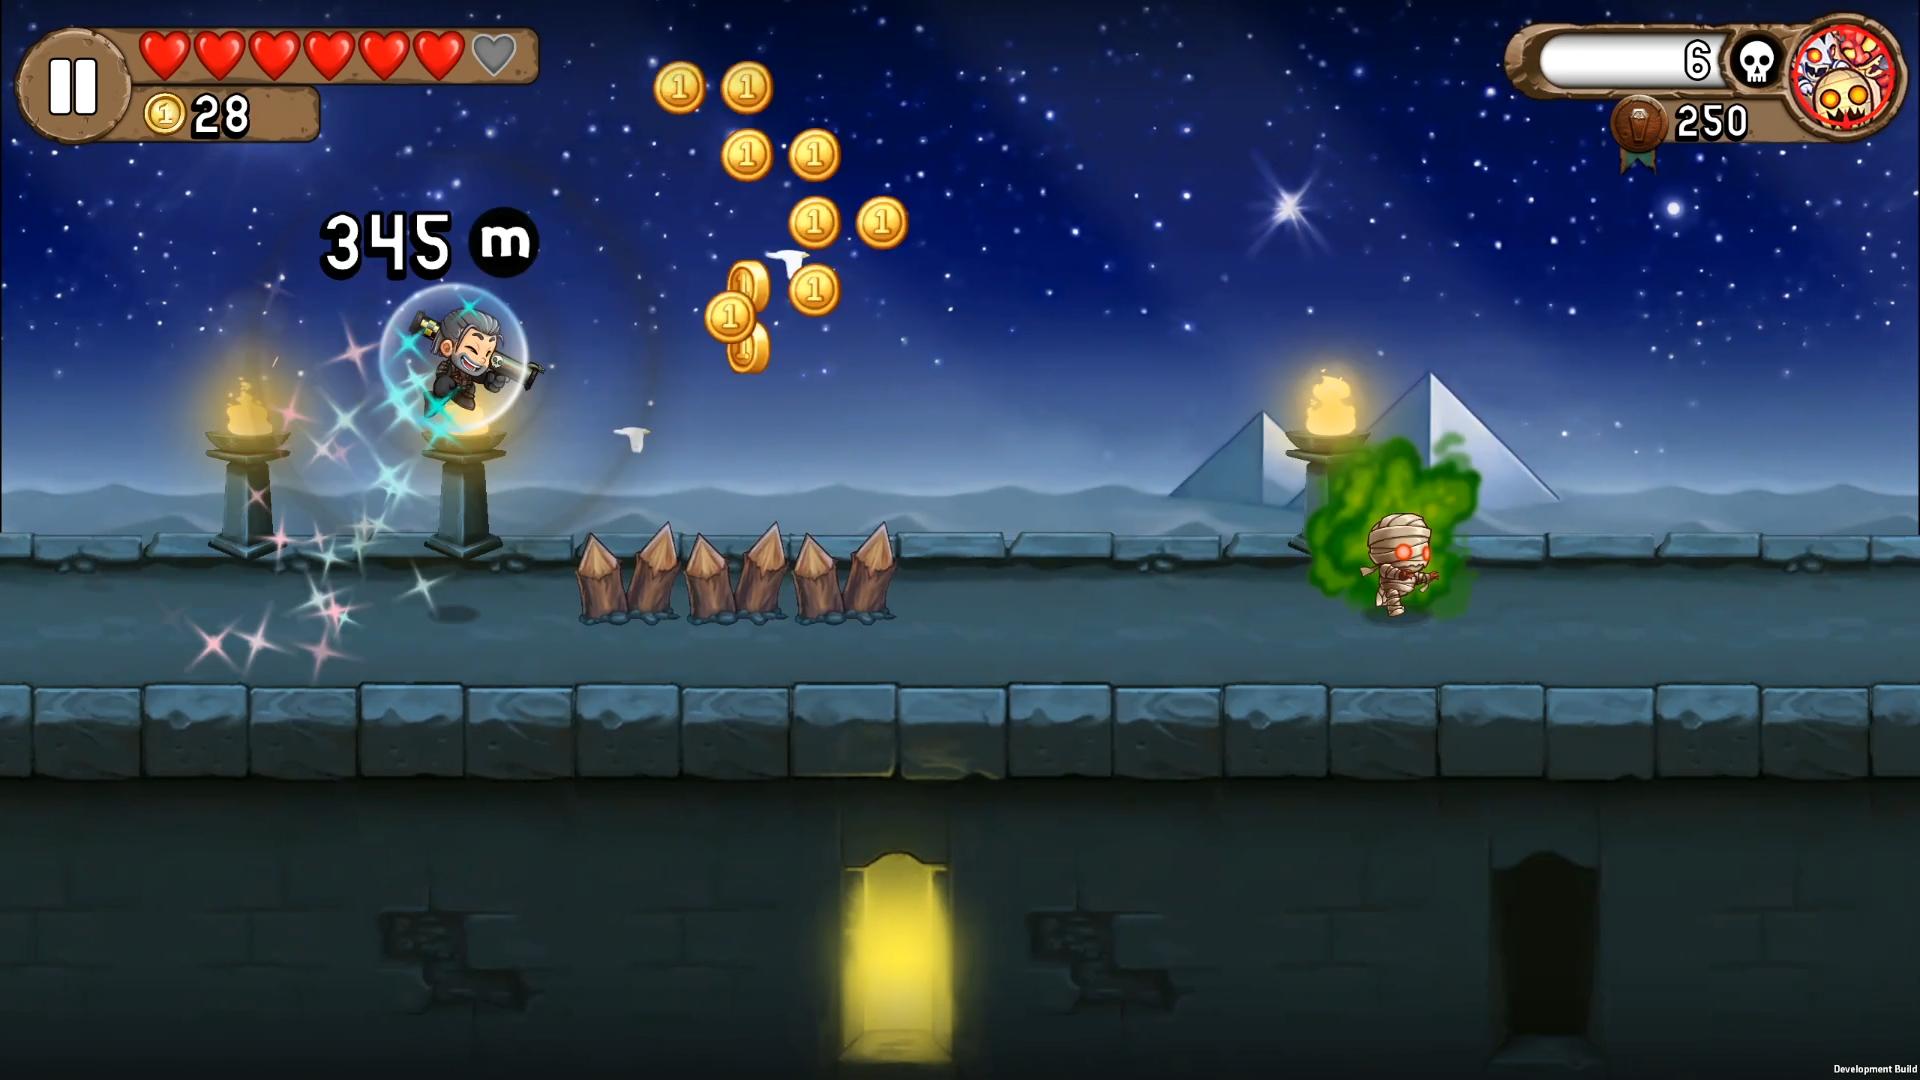 Monster Dash for Android - APK Download
